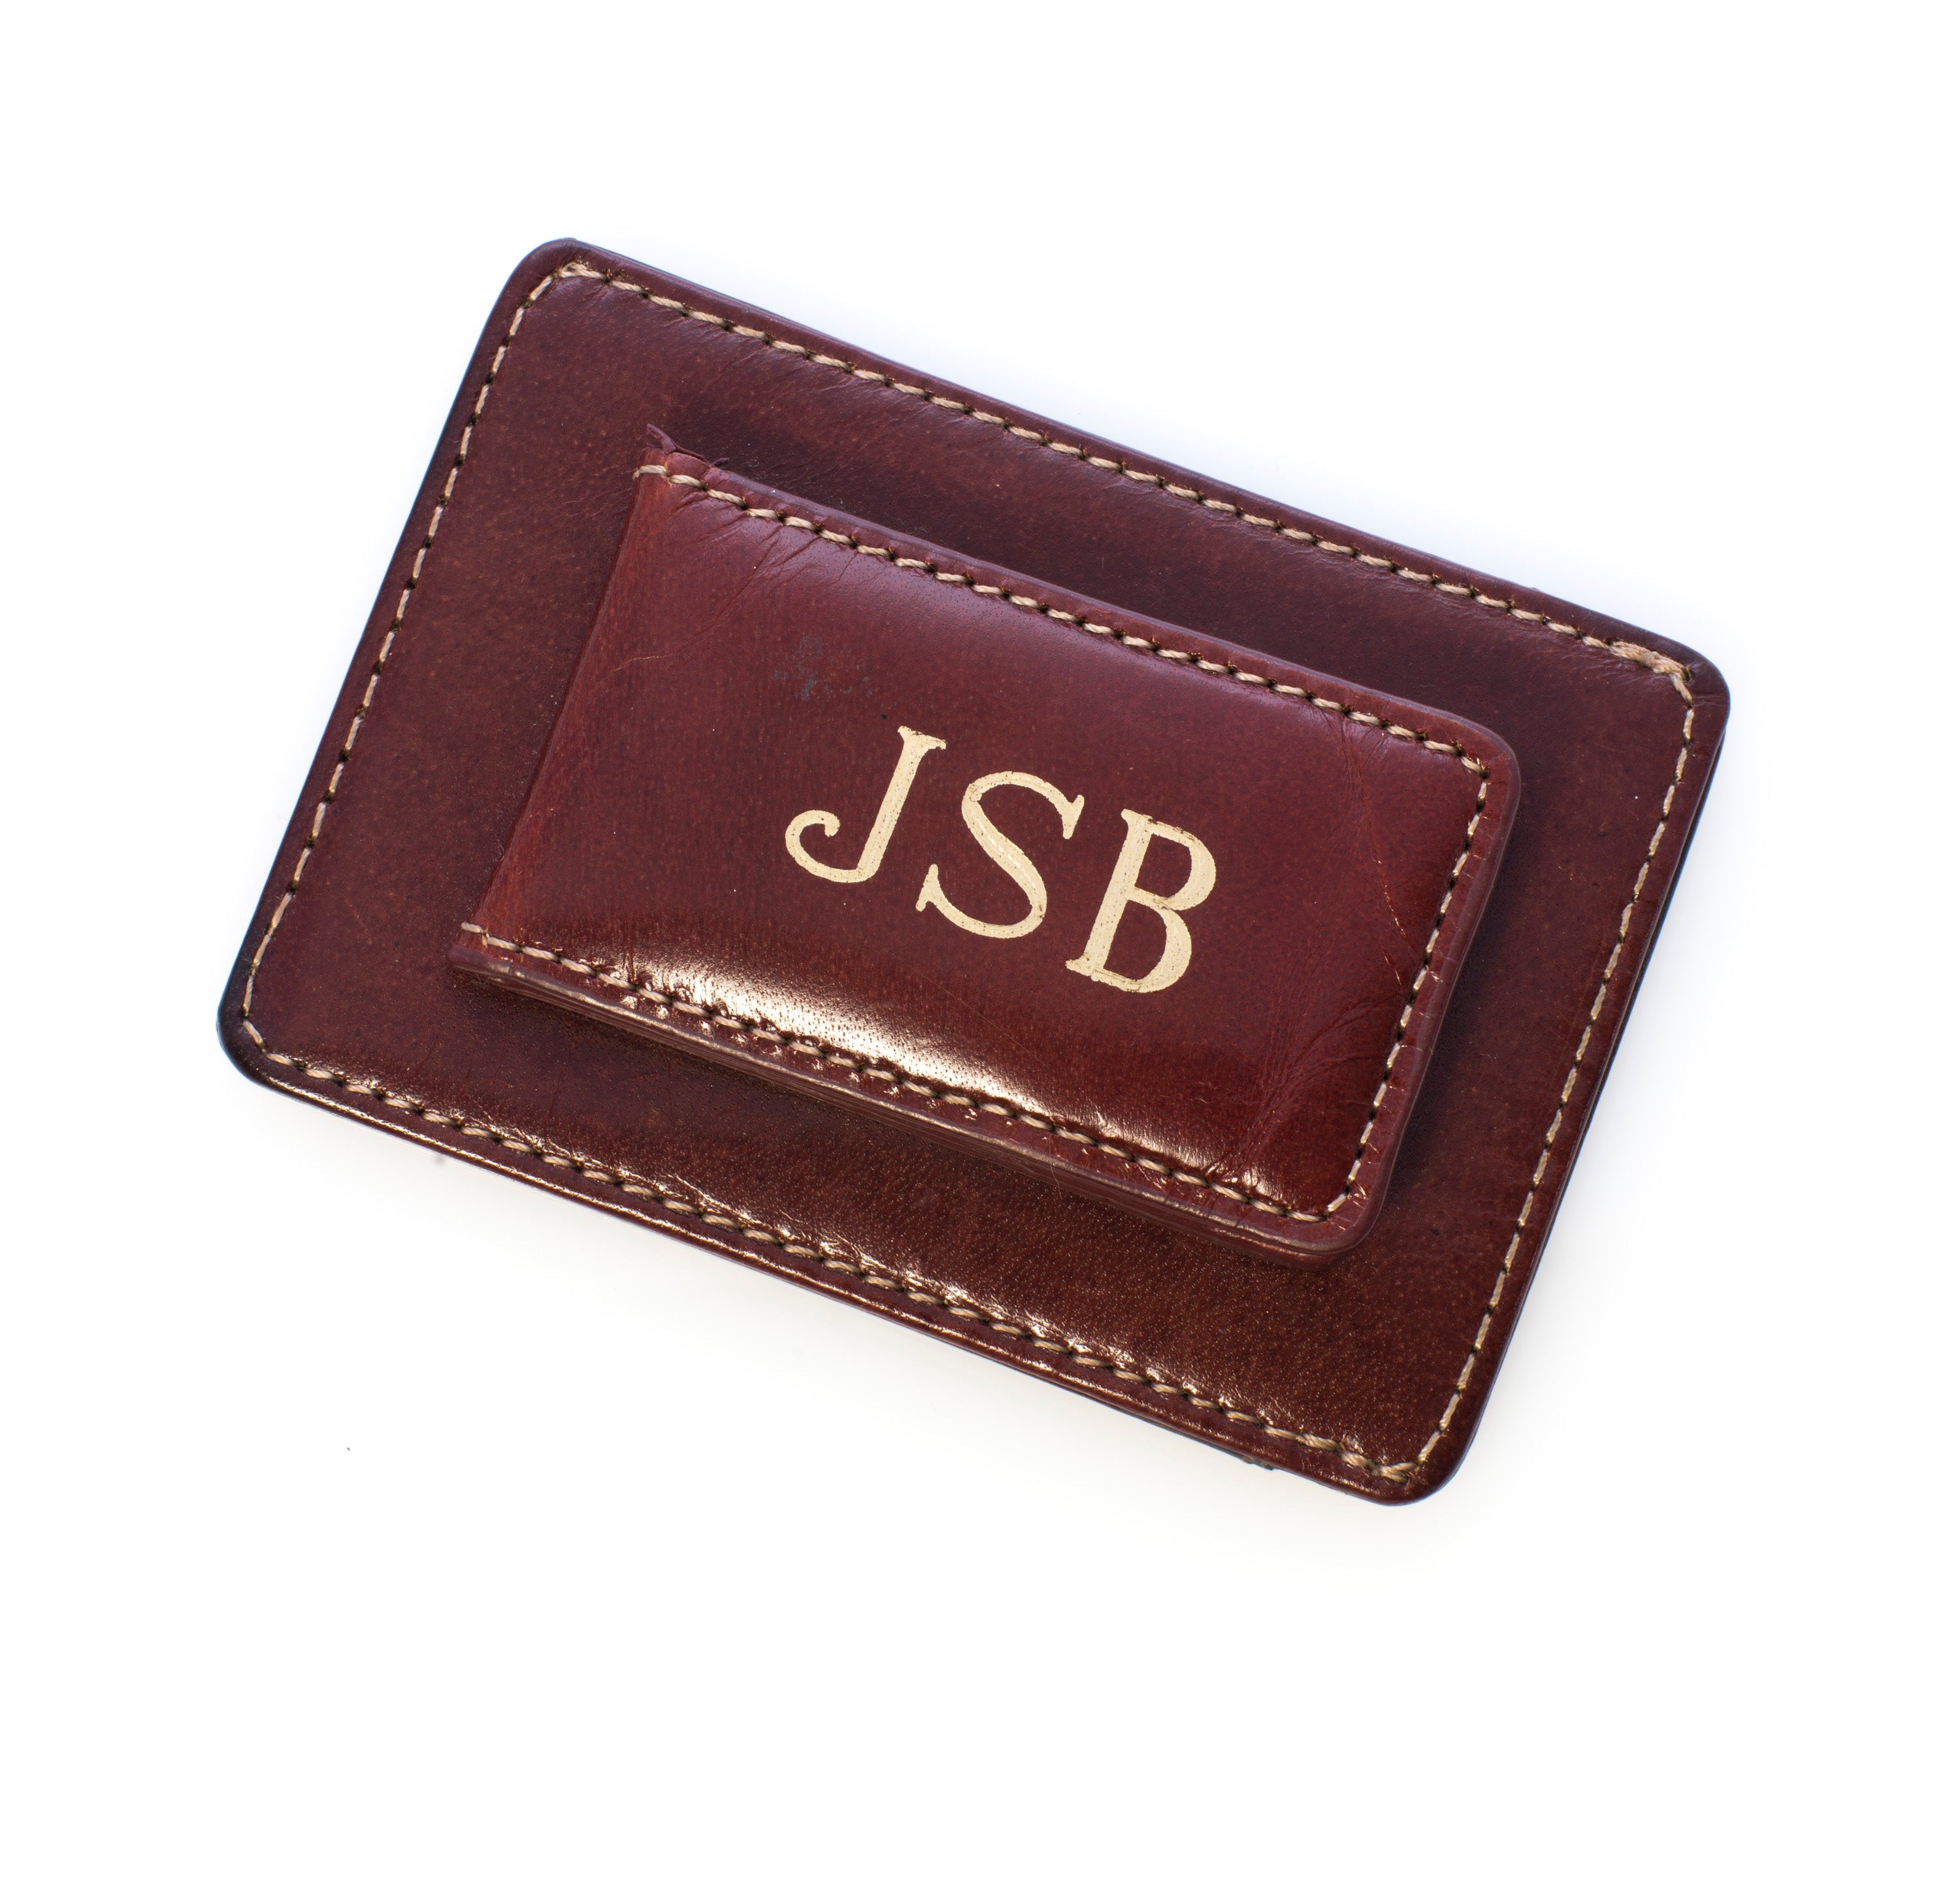 leather money clips with credit card holder